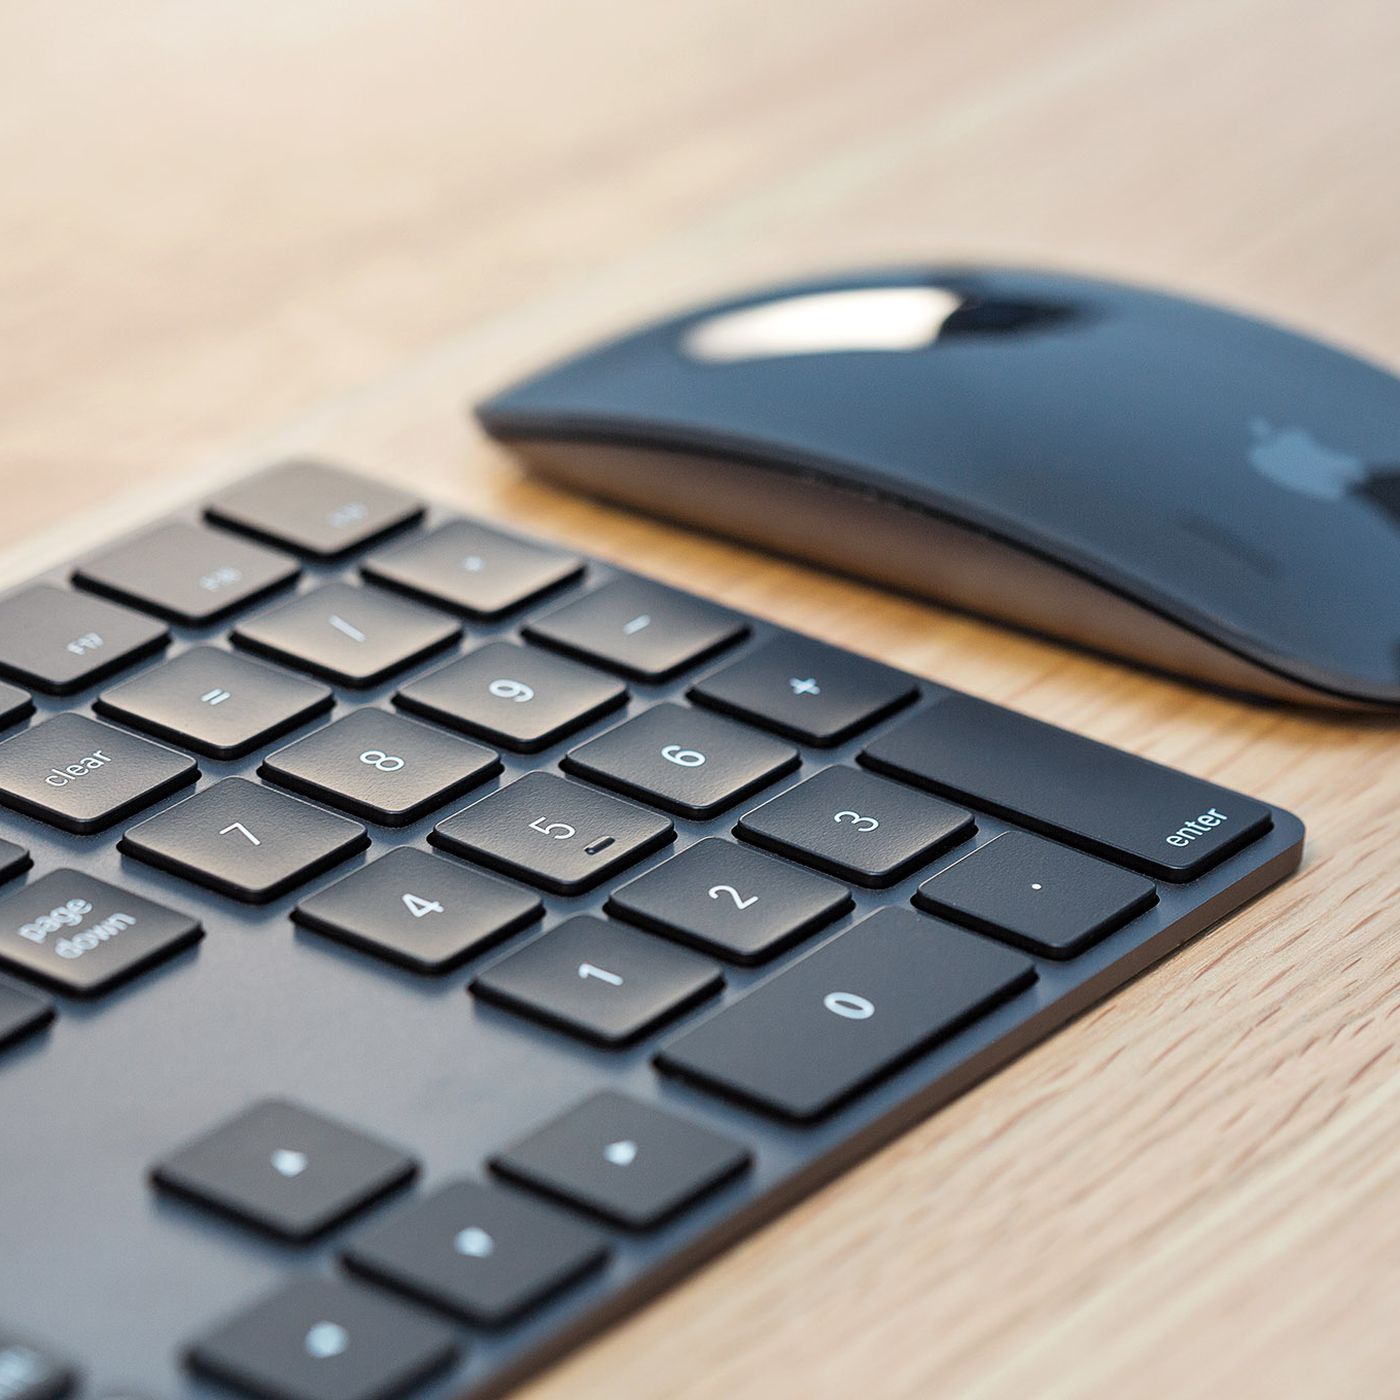 Apple confirms space gray Magic Keyboards and Mice are being discontinued -  The Verge